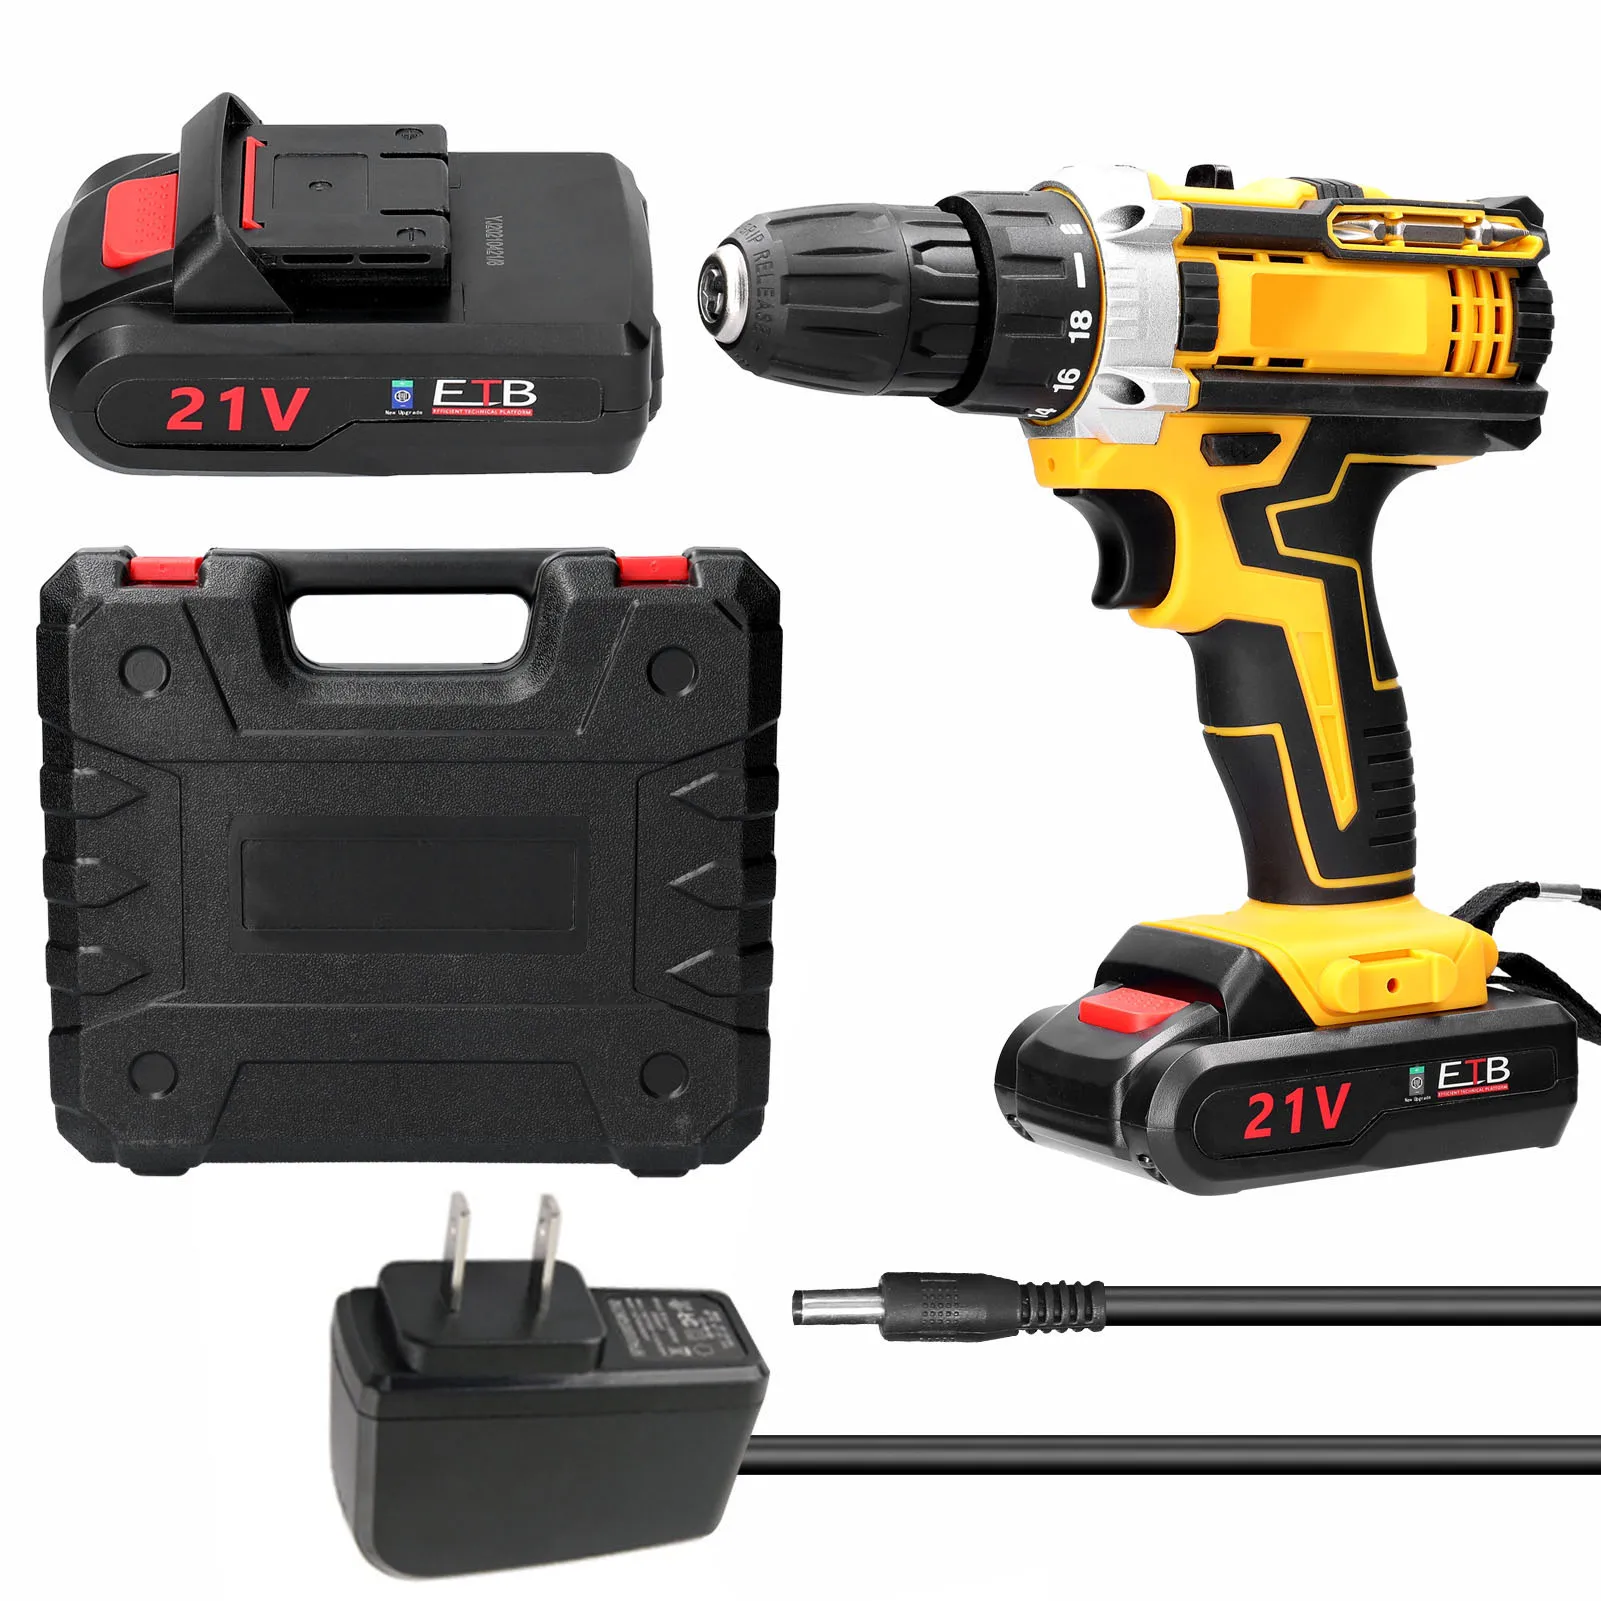 

21V Cordless Electric Screwdriver Electric Drill Brush Motor 2 Speeds Adjustment 18 Gears of Torque Holes Drilling Machine